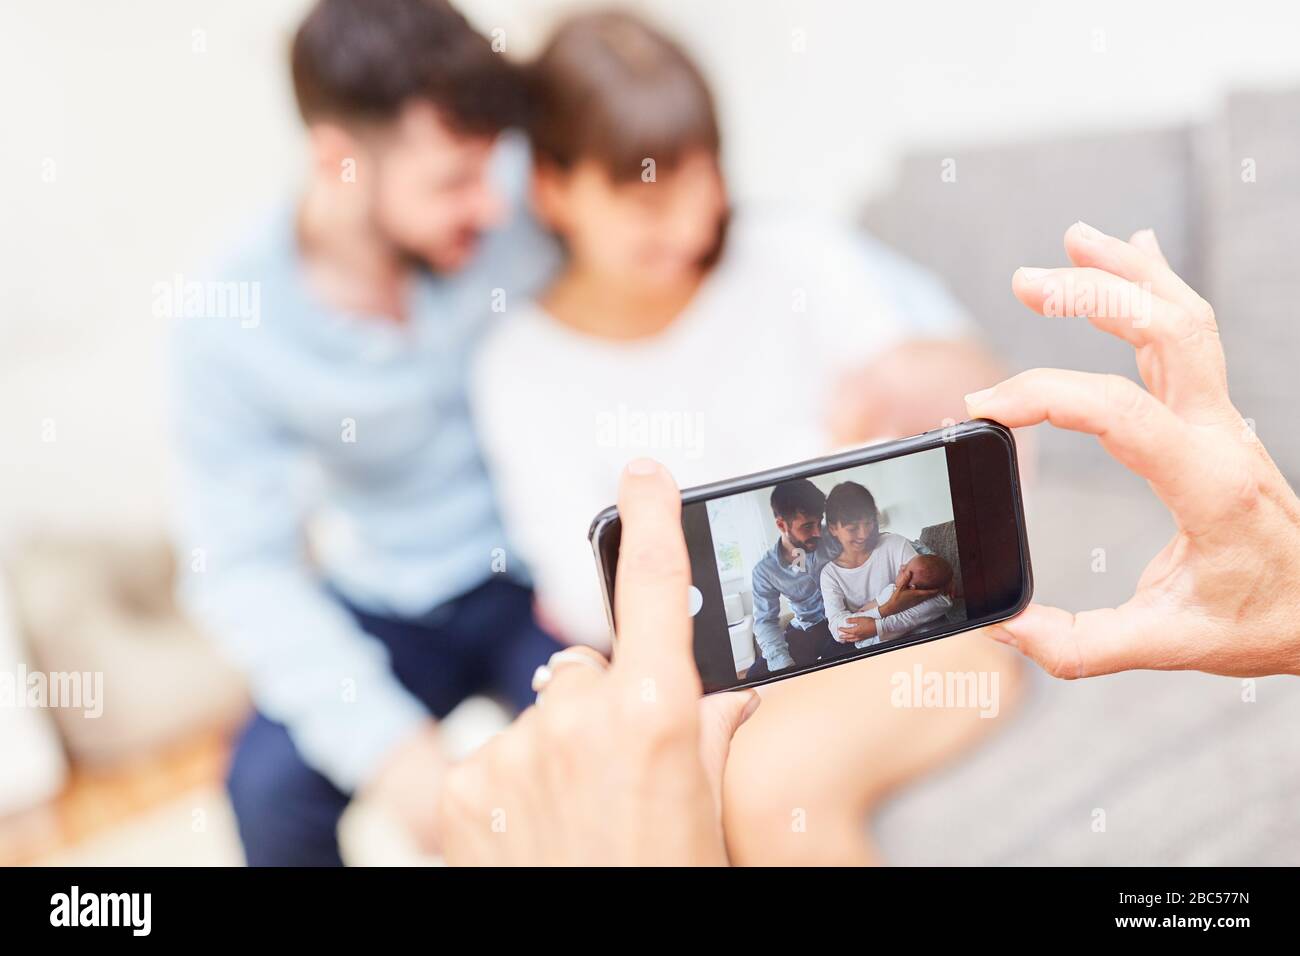 Smartphone takes picture of happy parents with a newborn baby Stock Photo